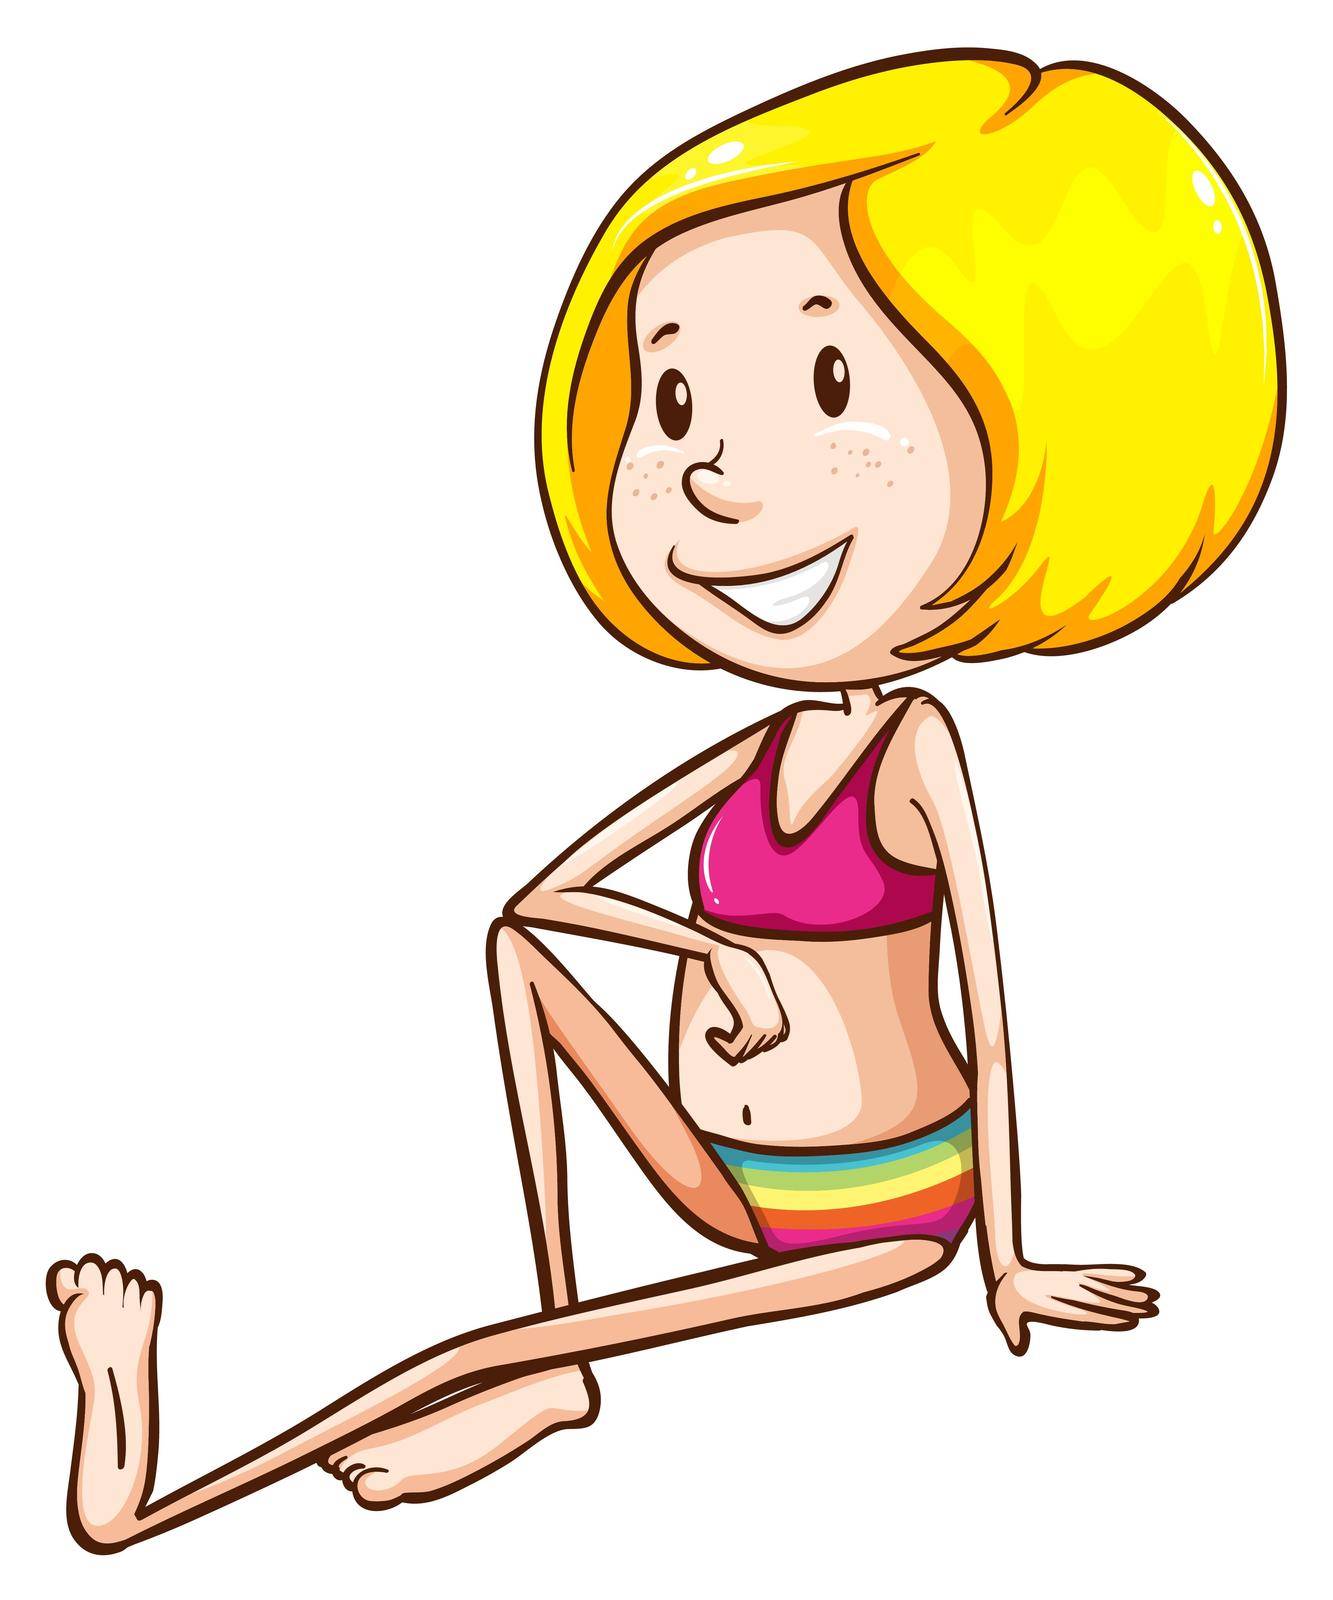 A coloured sketch of a young girl at the beach on a white background